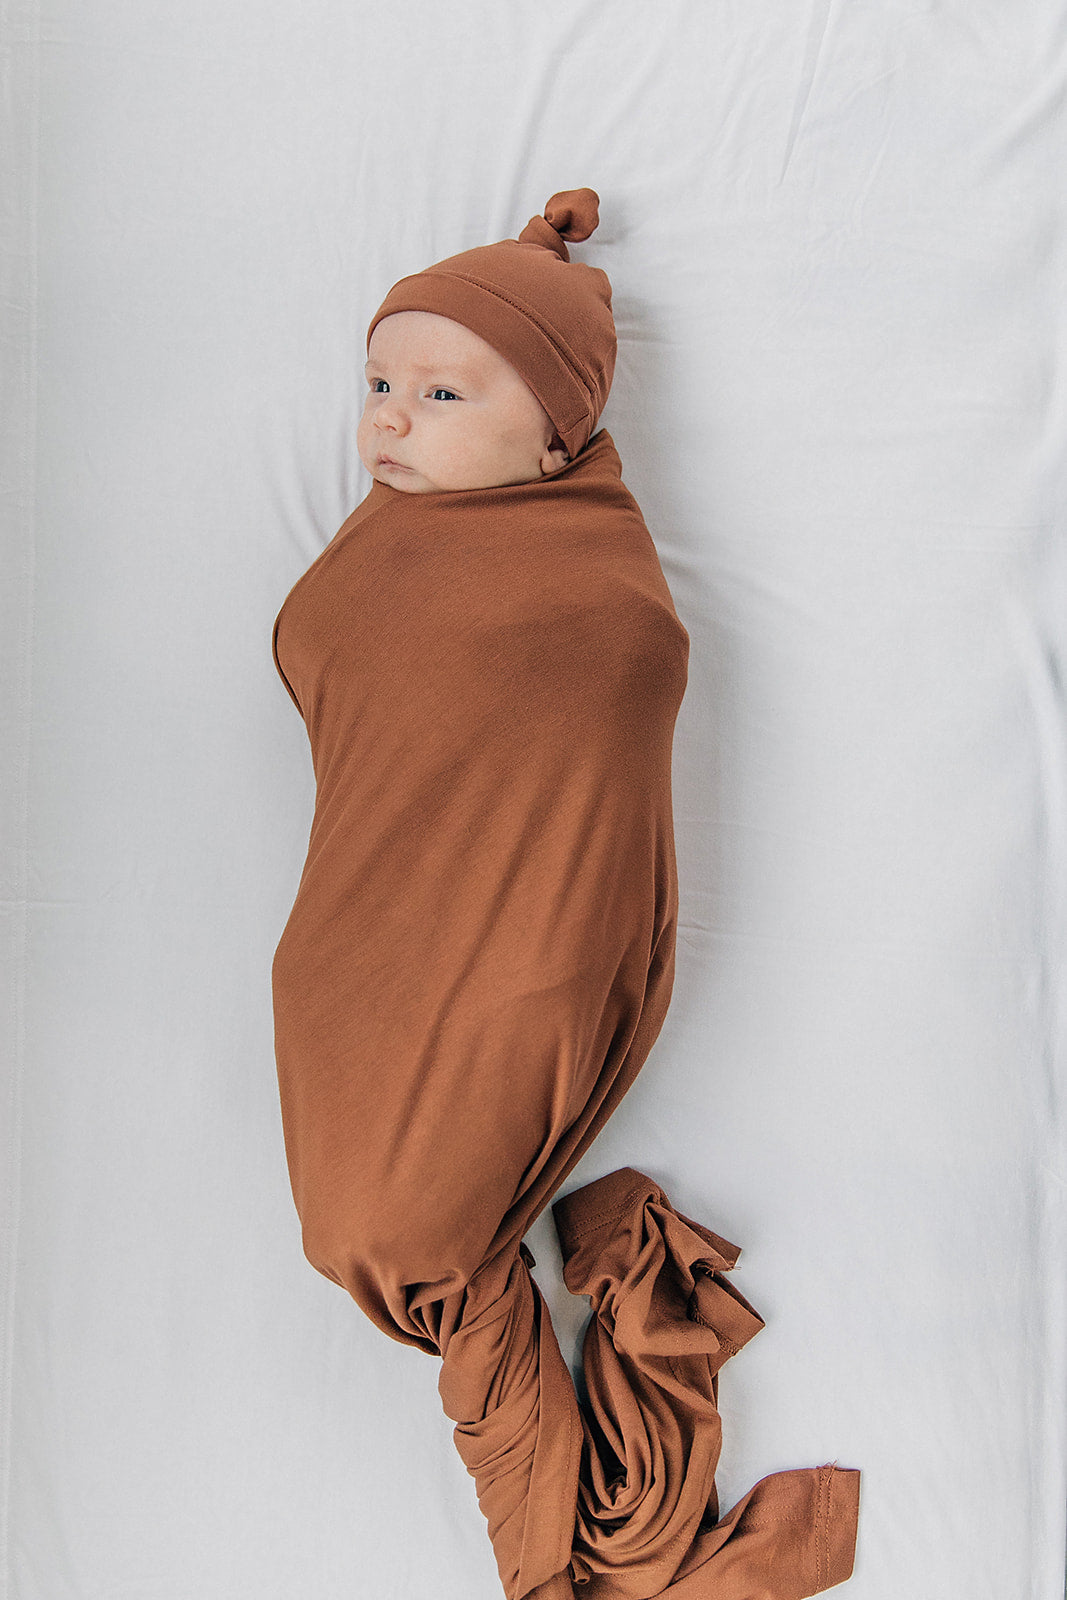 Mebie Baby Rust Stretch Swaddle. Mebie Baby Bamboo Stretch Swaddle. Gender Neutral for take home outfits and swaddling newborns. 